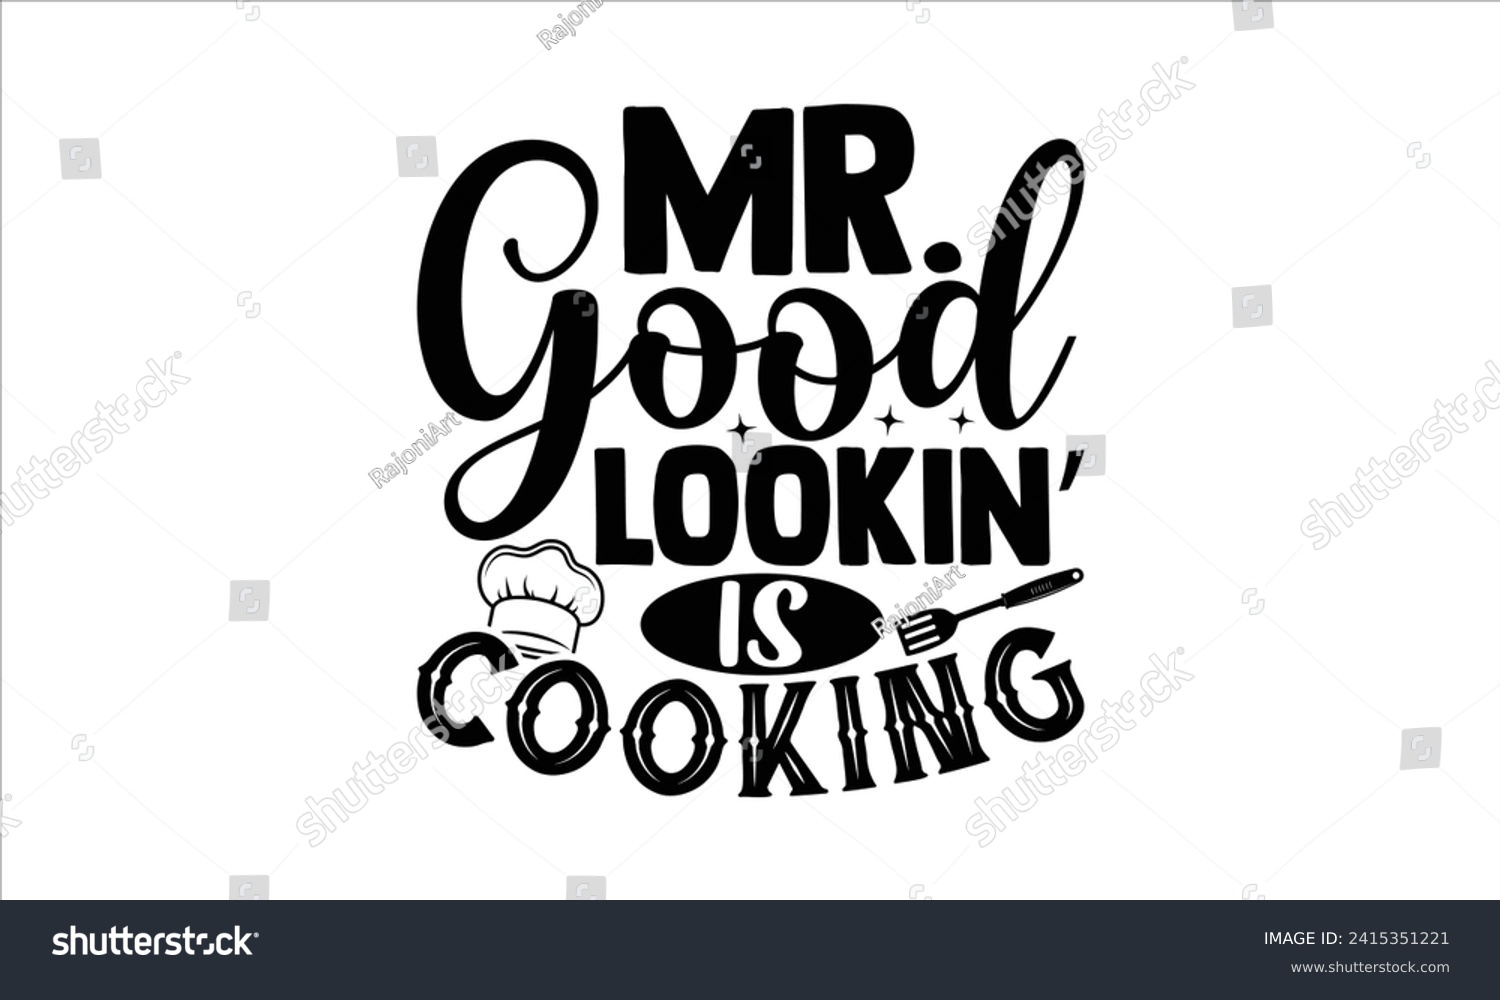 SVG of Mr. good lookin’ is cooking - Barbecue T-Shirt Design, Modern calligraphy, Vector illustration with hand drawn lettering, posters, banners, cards, mugs, Notebooks, white background. svg